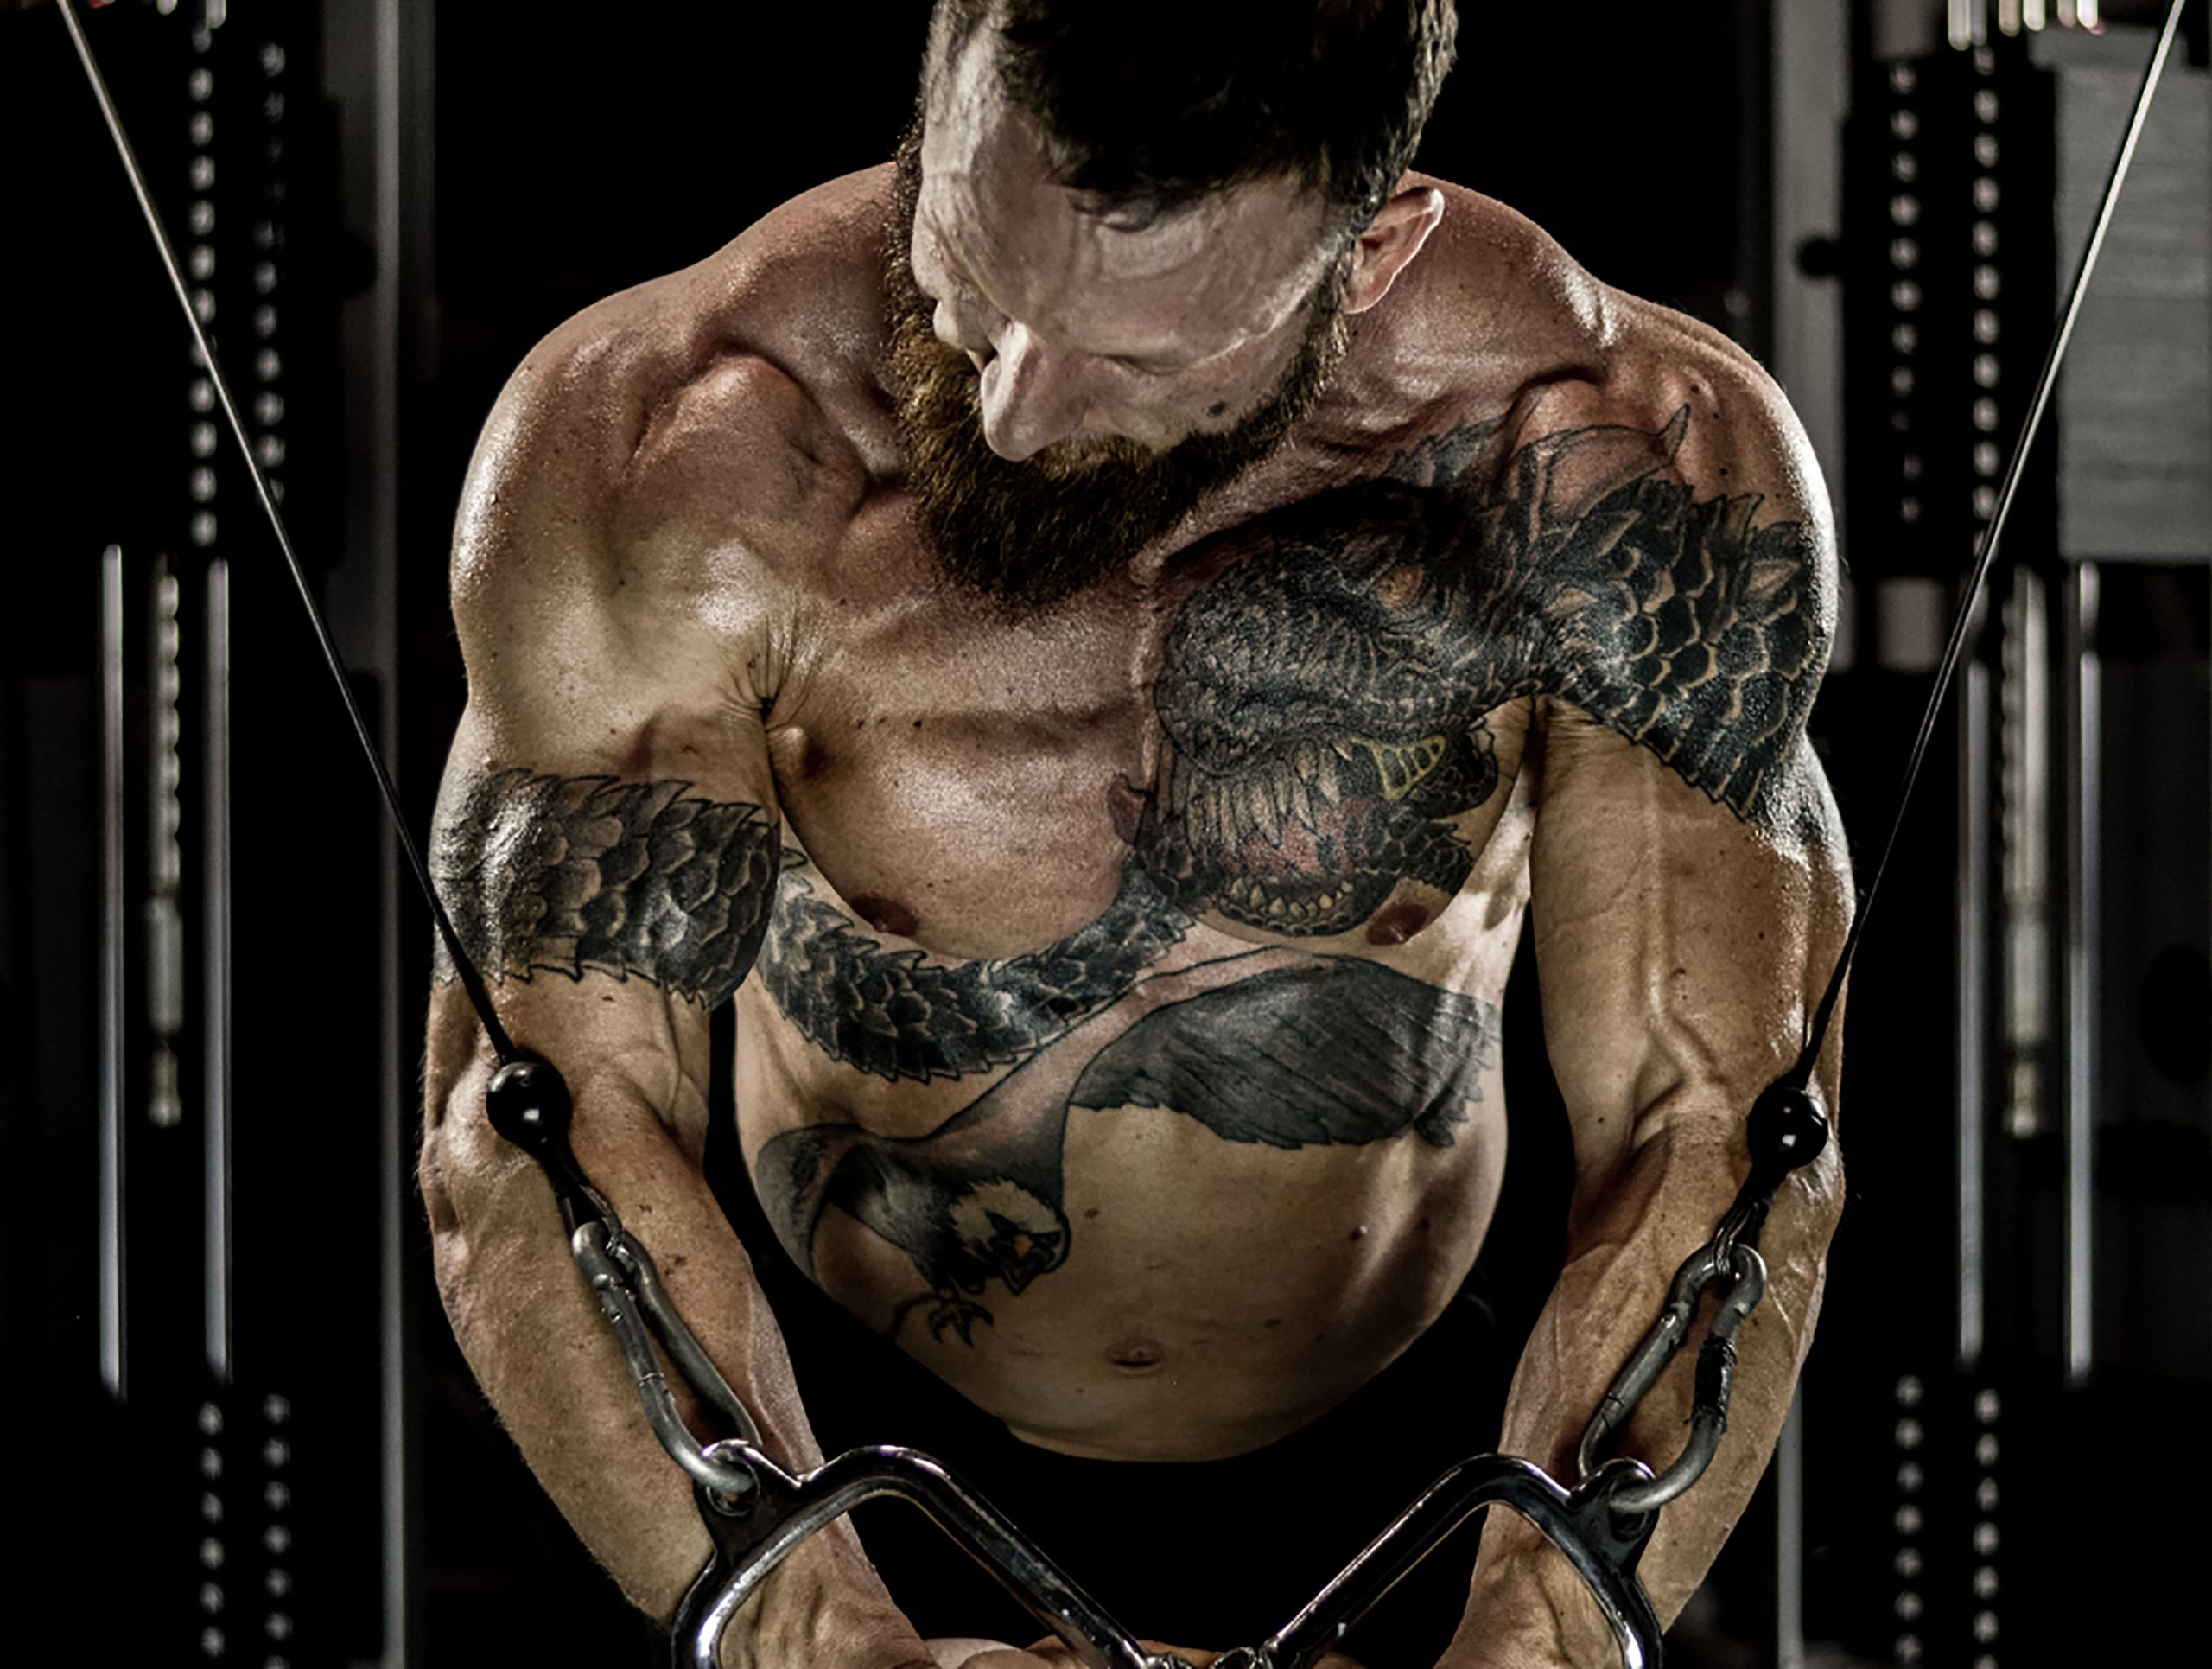 Crazy week of Photo Shoot, Travel, and working the Arnold - SHOOT IMAGES INCLUDED